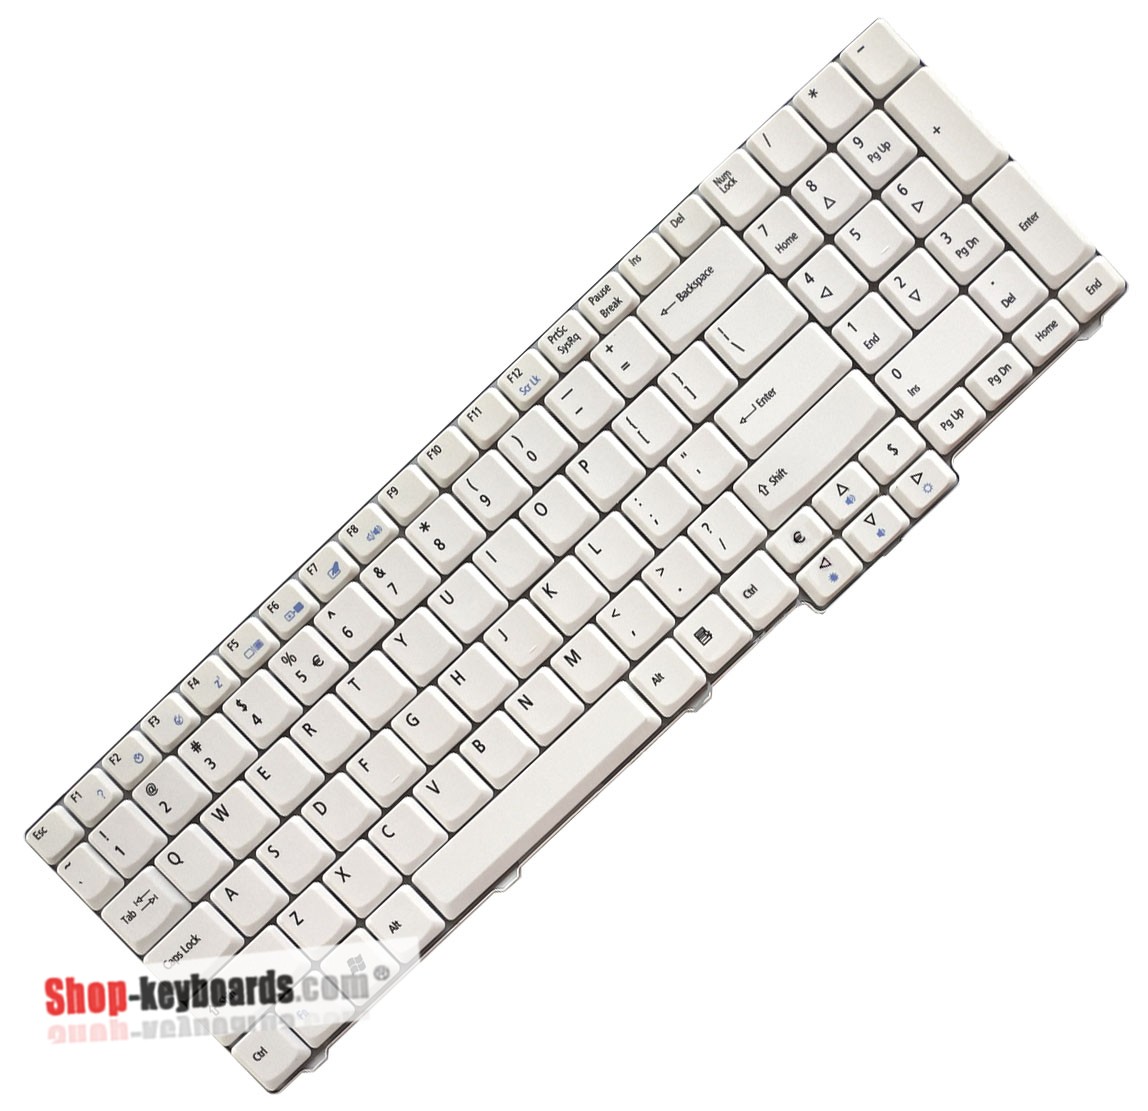 Acer Aspire 9300-5317 Keyboard replacement